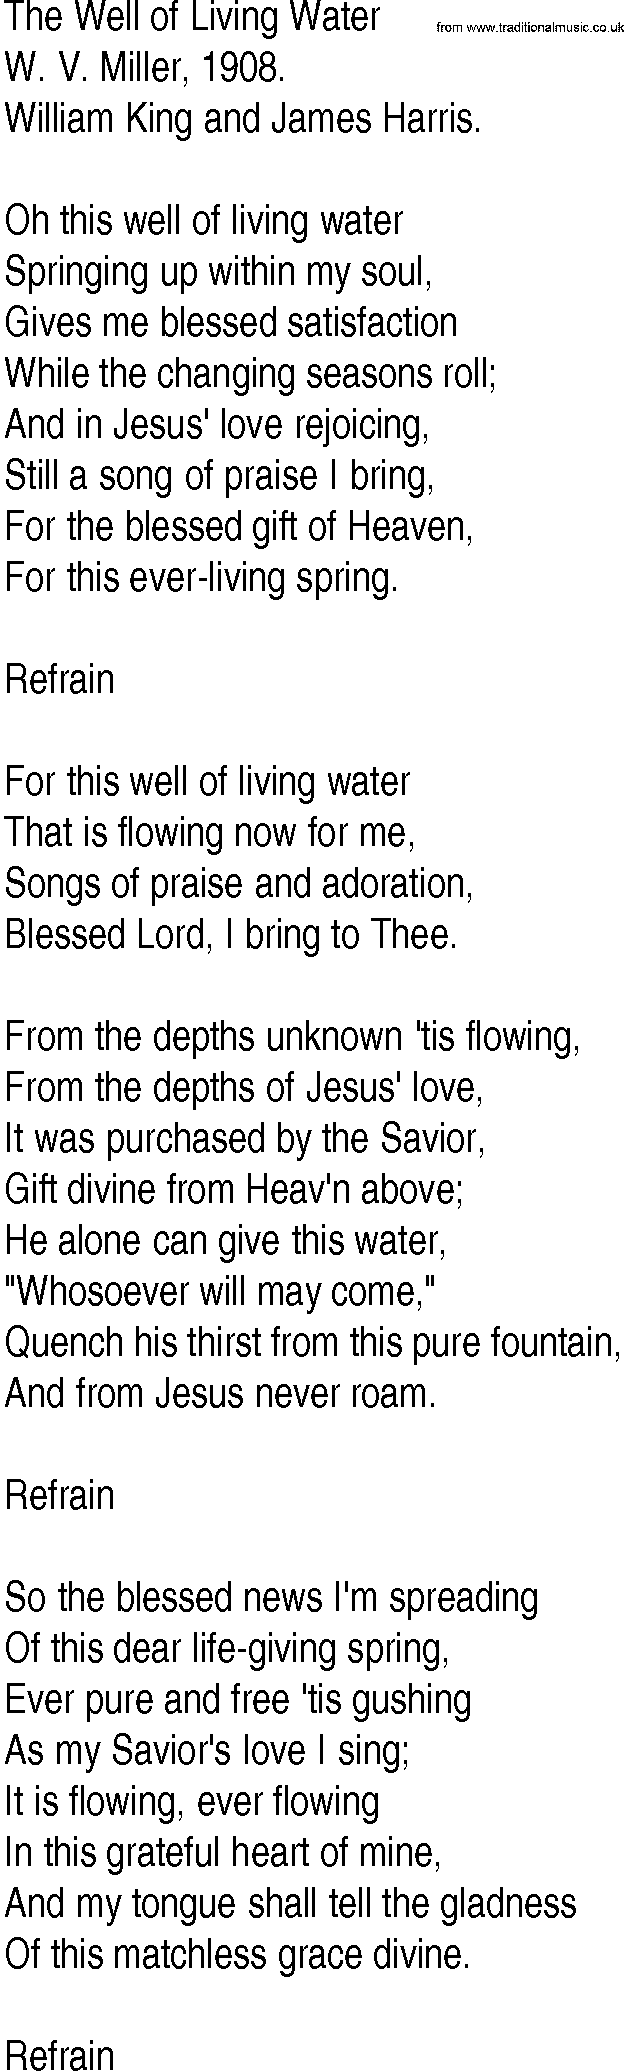 Hymn and Gospel Song: The Well of Living Water by W V Miller lyrics